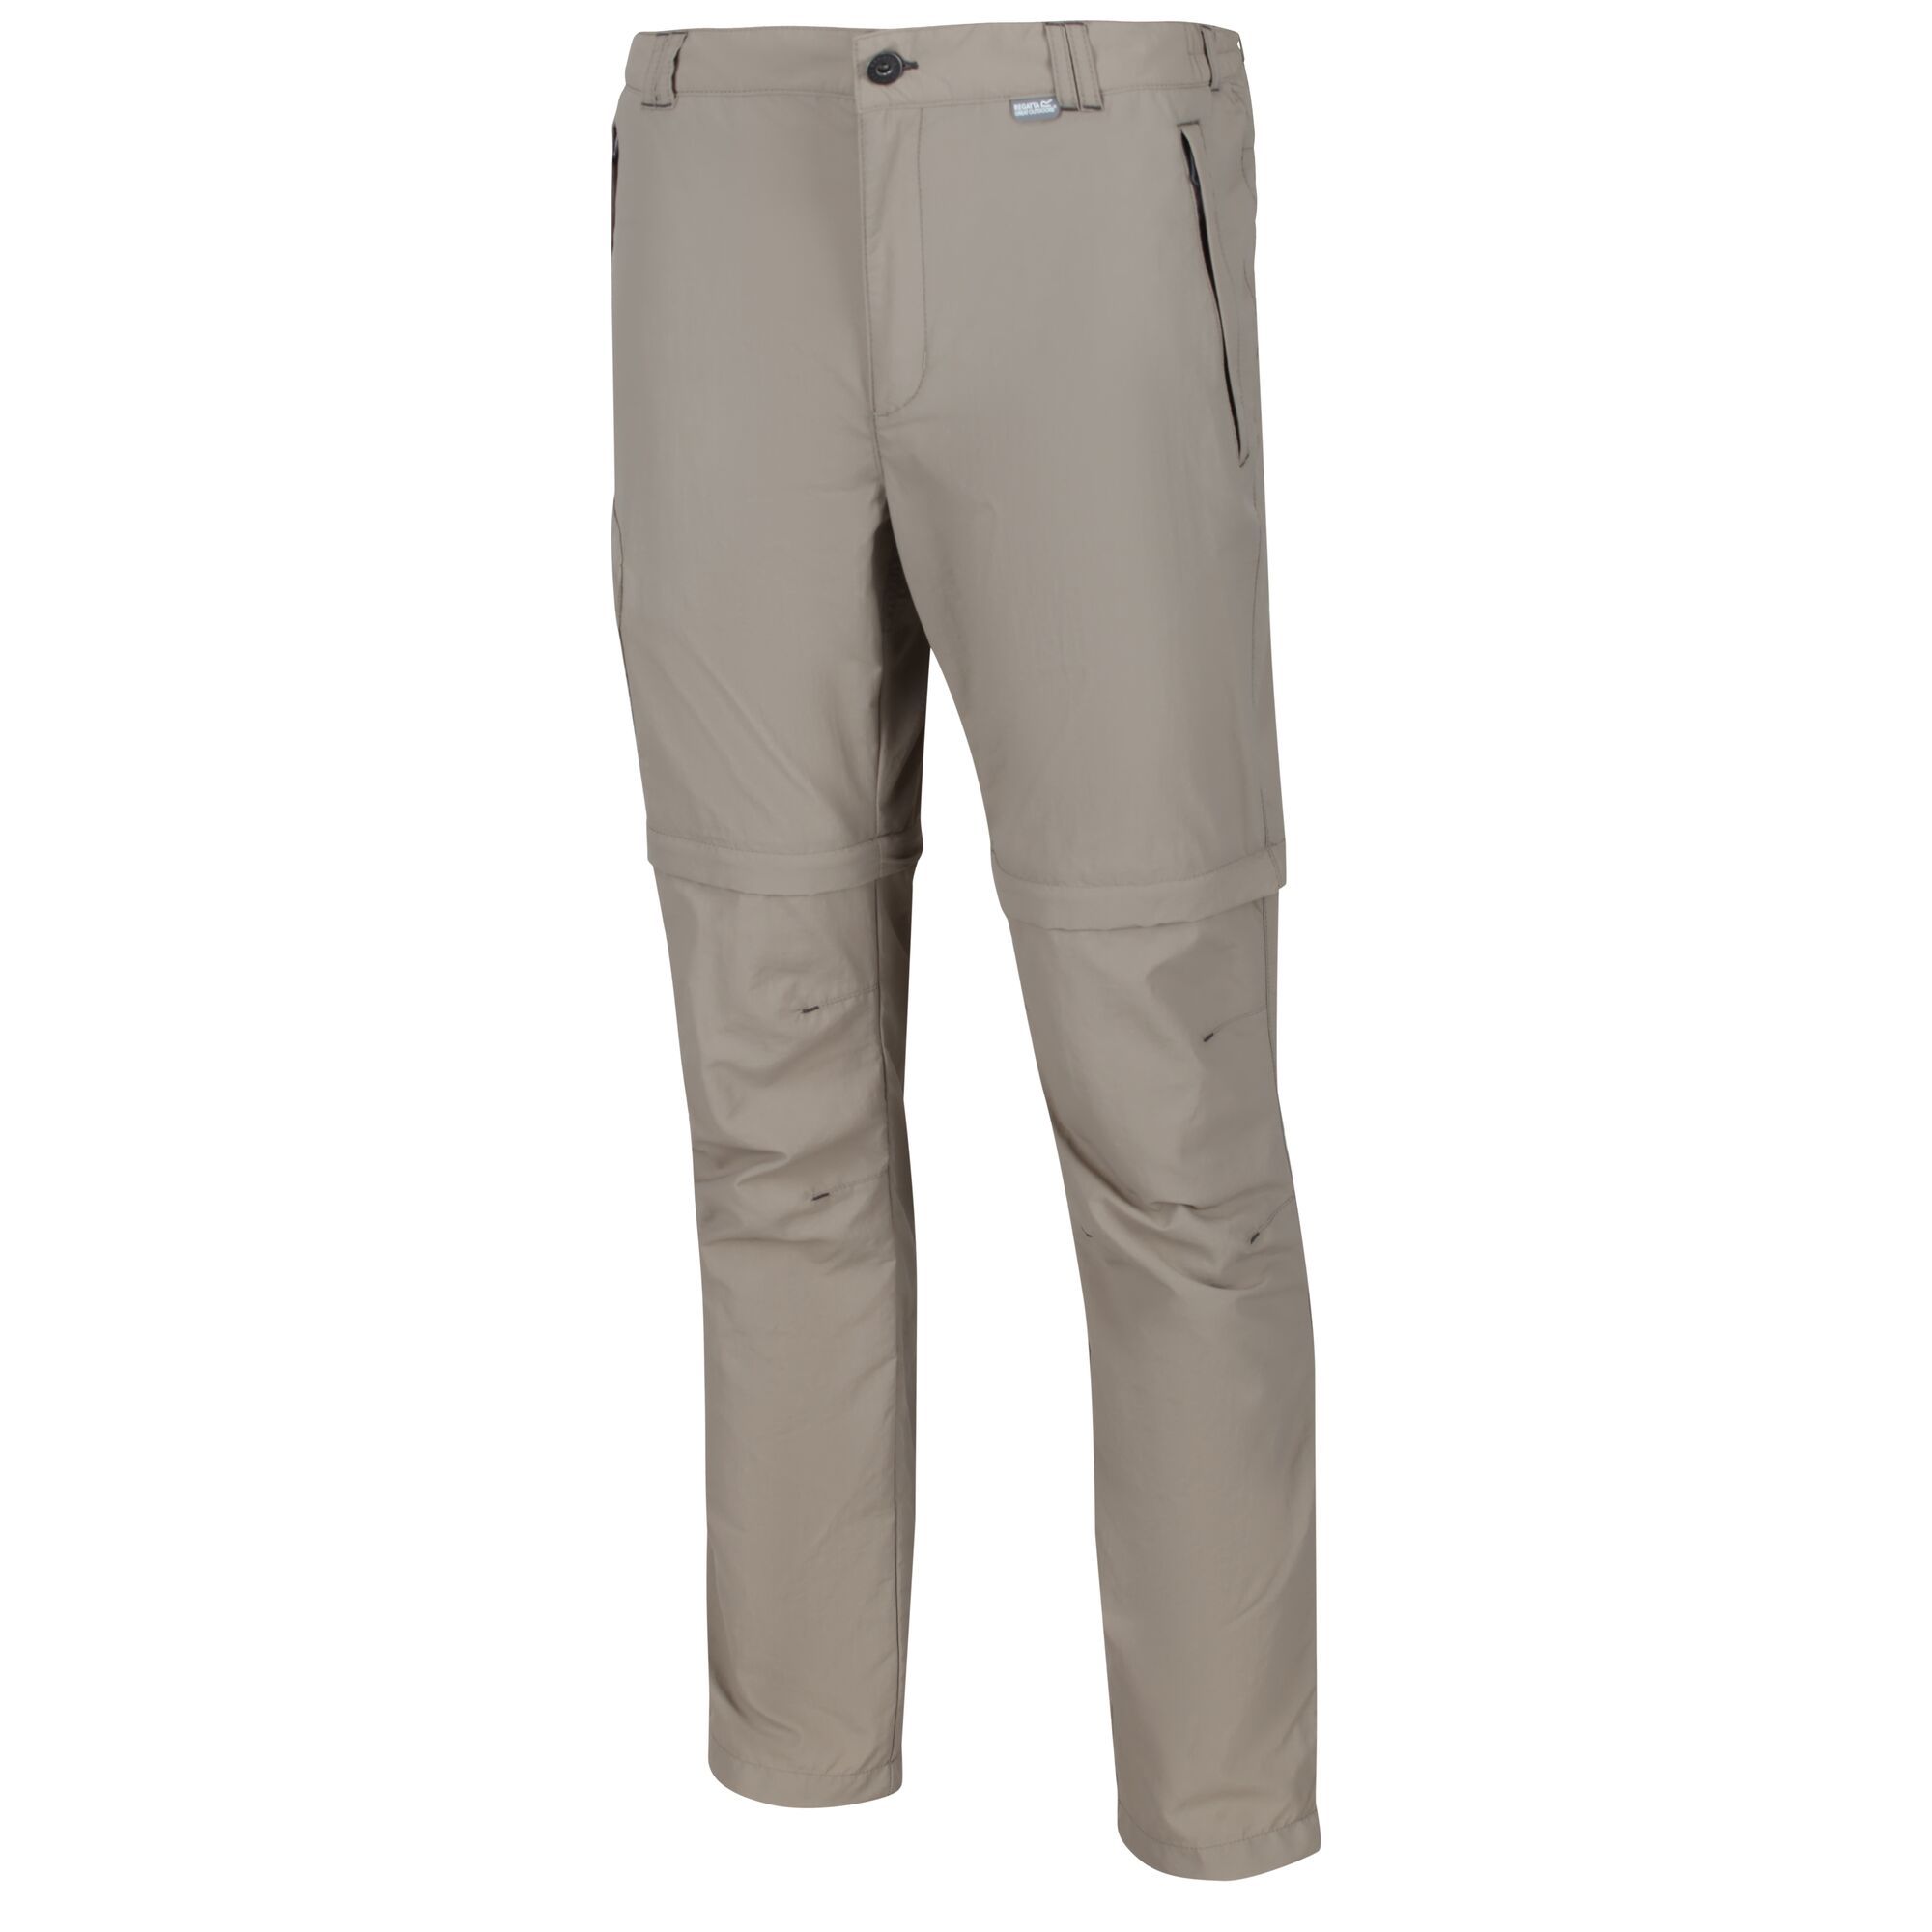 Material: 100% lightweight polyamide fabric. Durable water repellent finish. Quick drying. Crease resistant. Part elasticated waist. Multi pocketed. Zip-off legs - converts into shorts. Drawcord at leg hems.